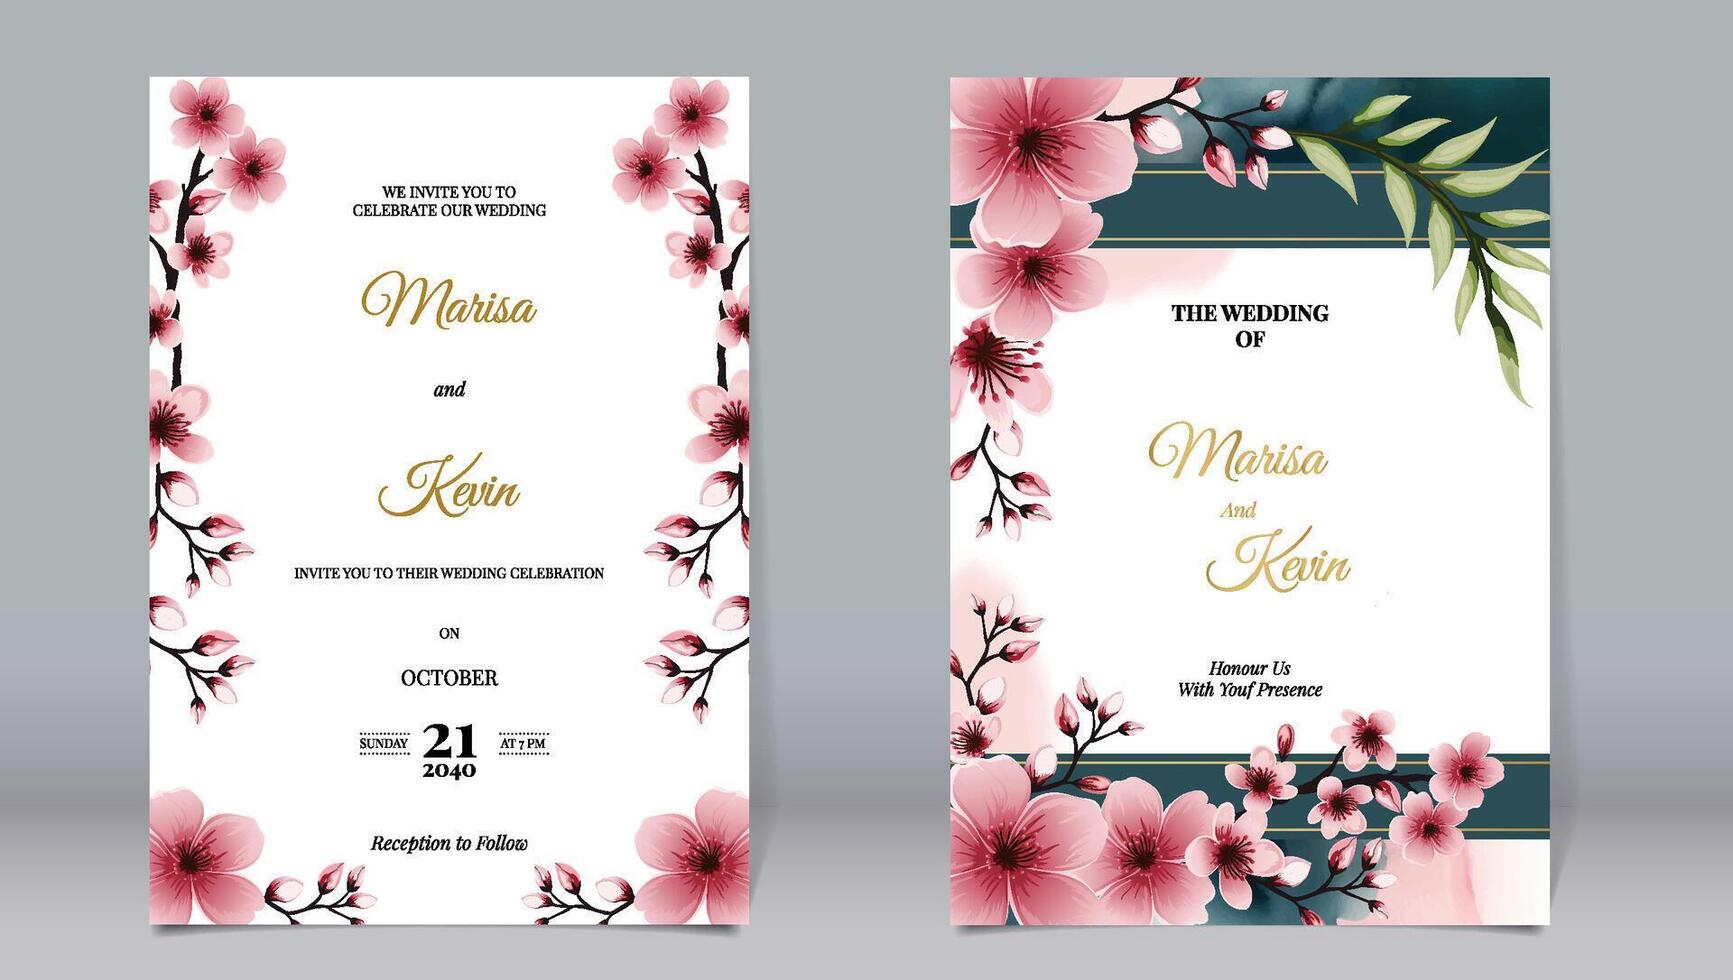 Luxury wedding invitation decoration cherry blossoms and leaves on watercolor background vector